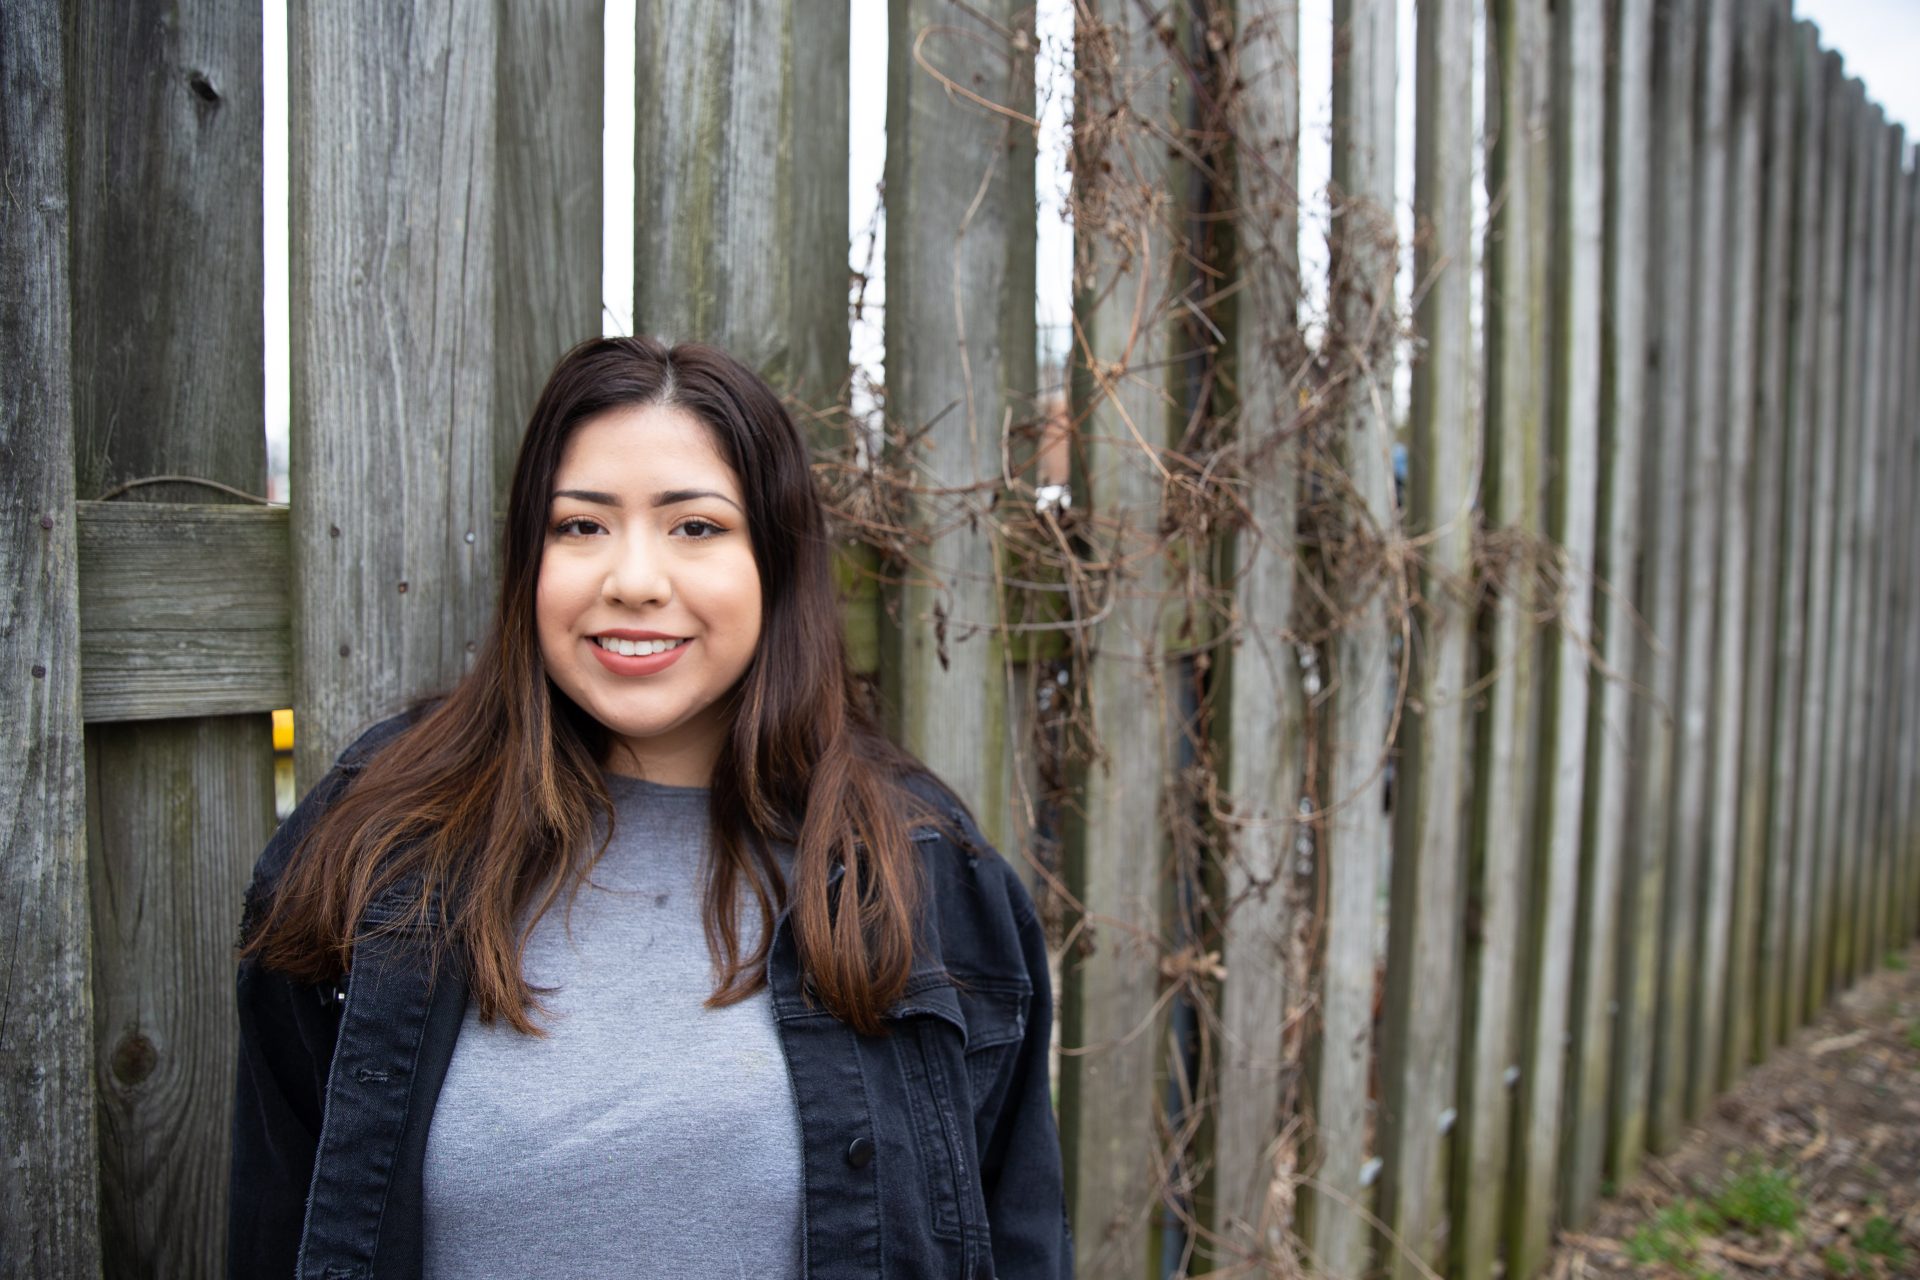  A portrait of Jenn Cruz posing in front of a wooden fence on campus.